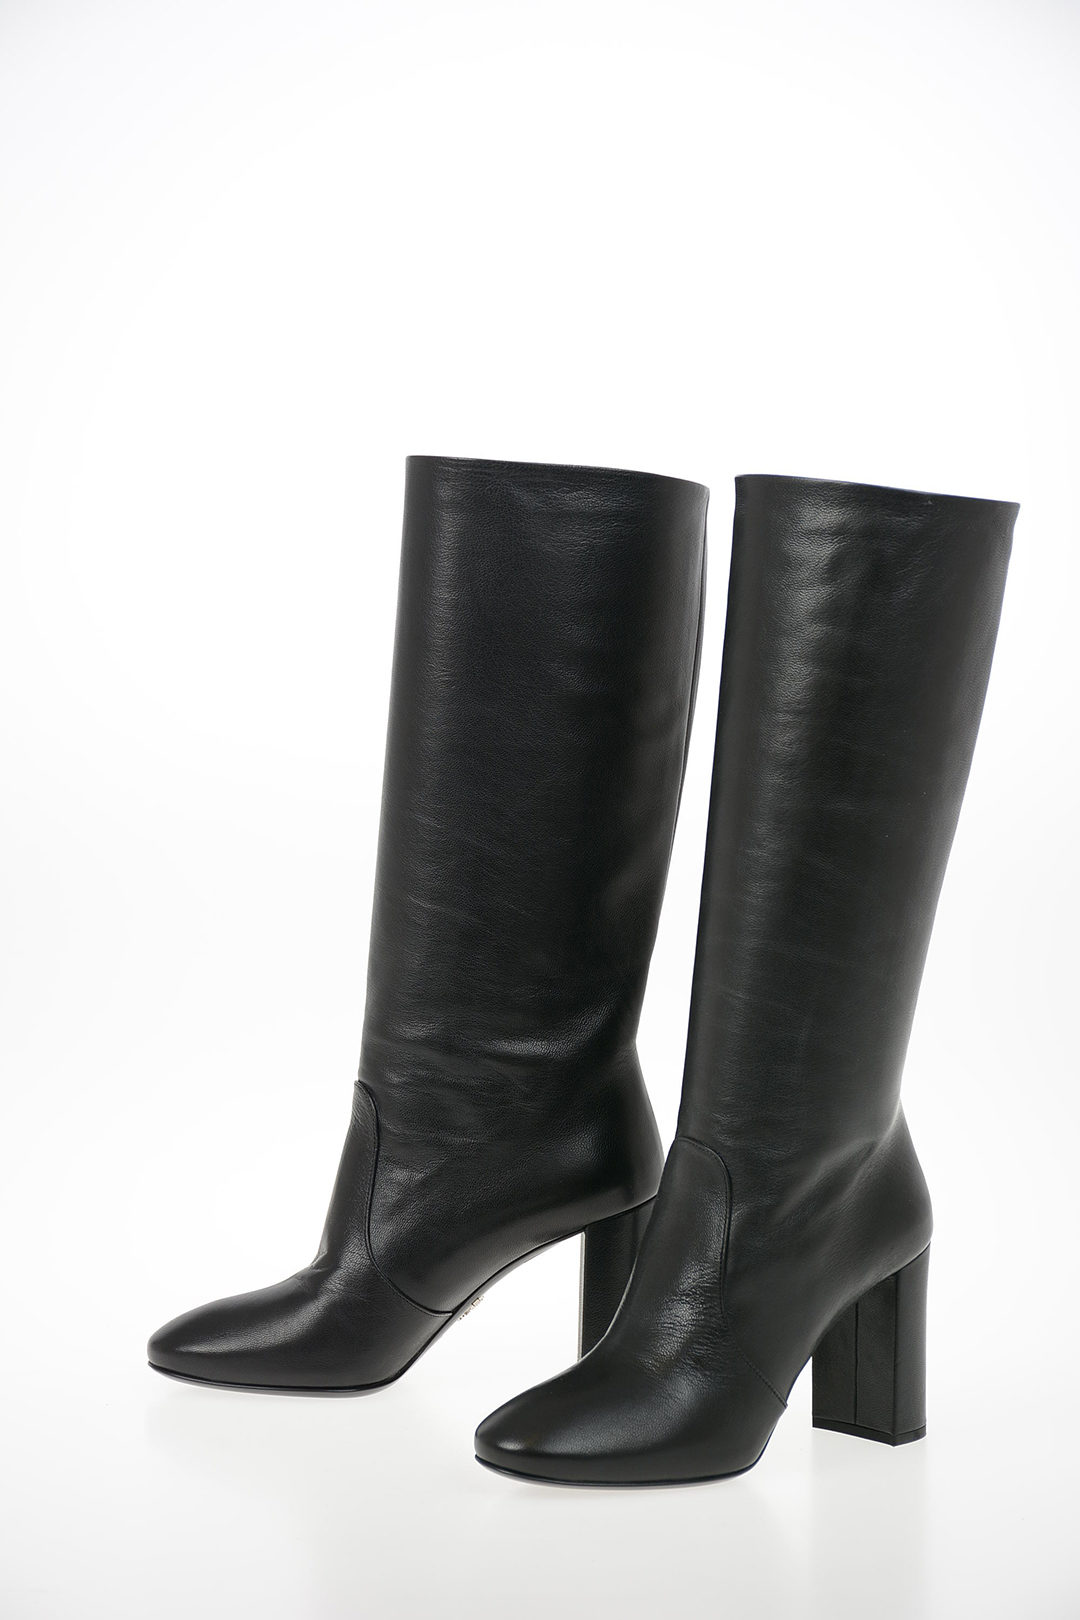 Prada Leather Pull On Boots with Squared Heel 8 cm women - Glamood Outlet